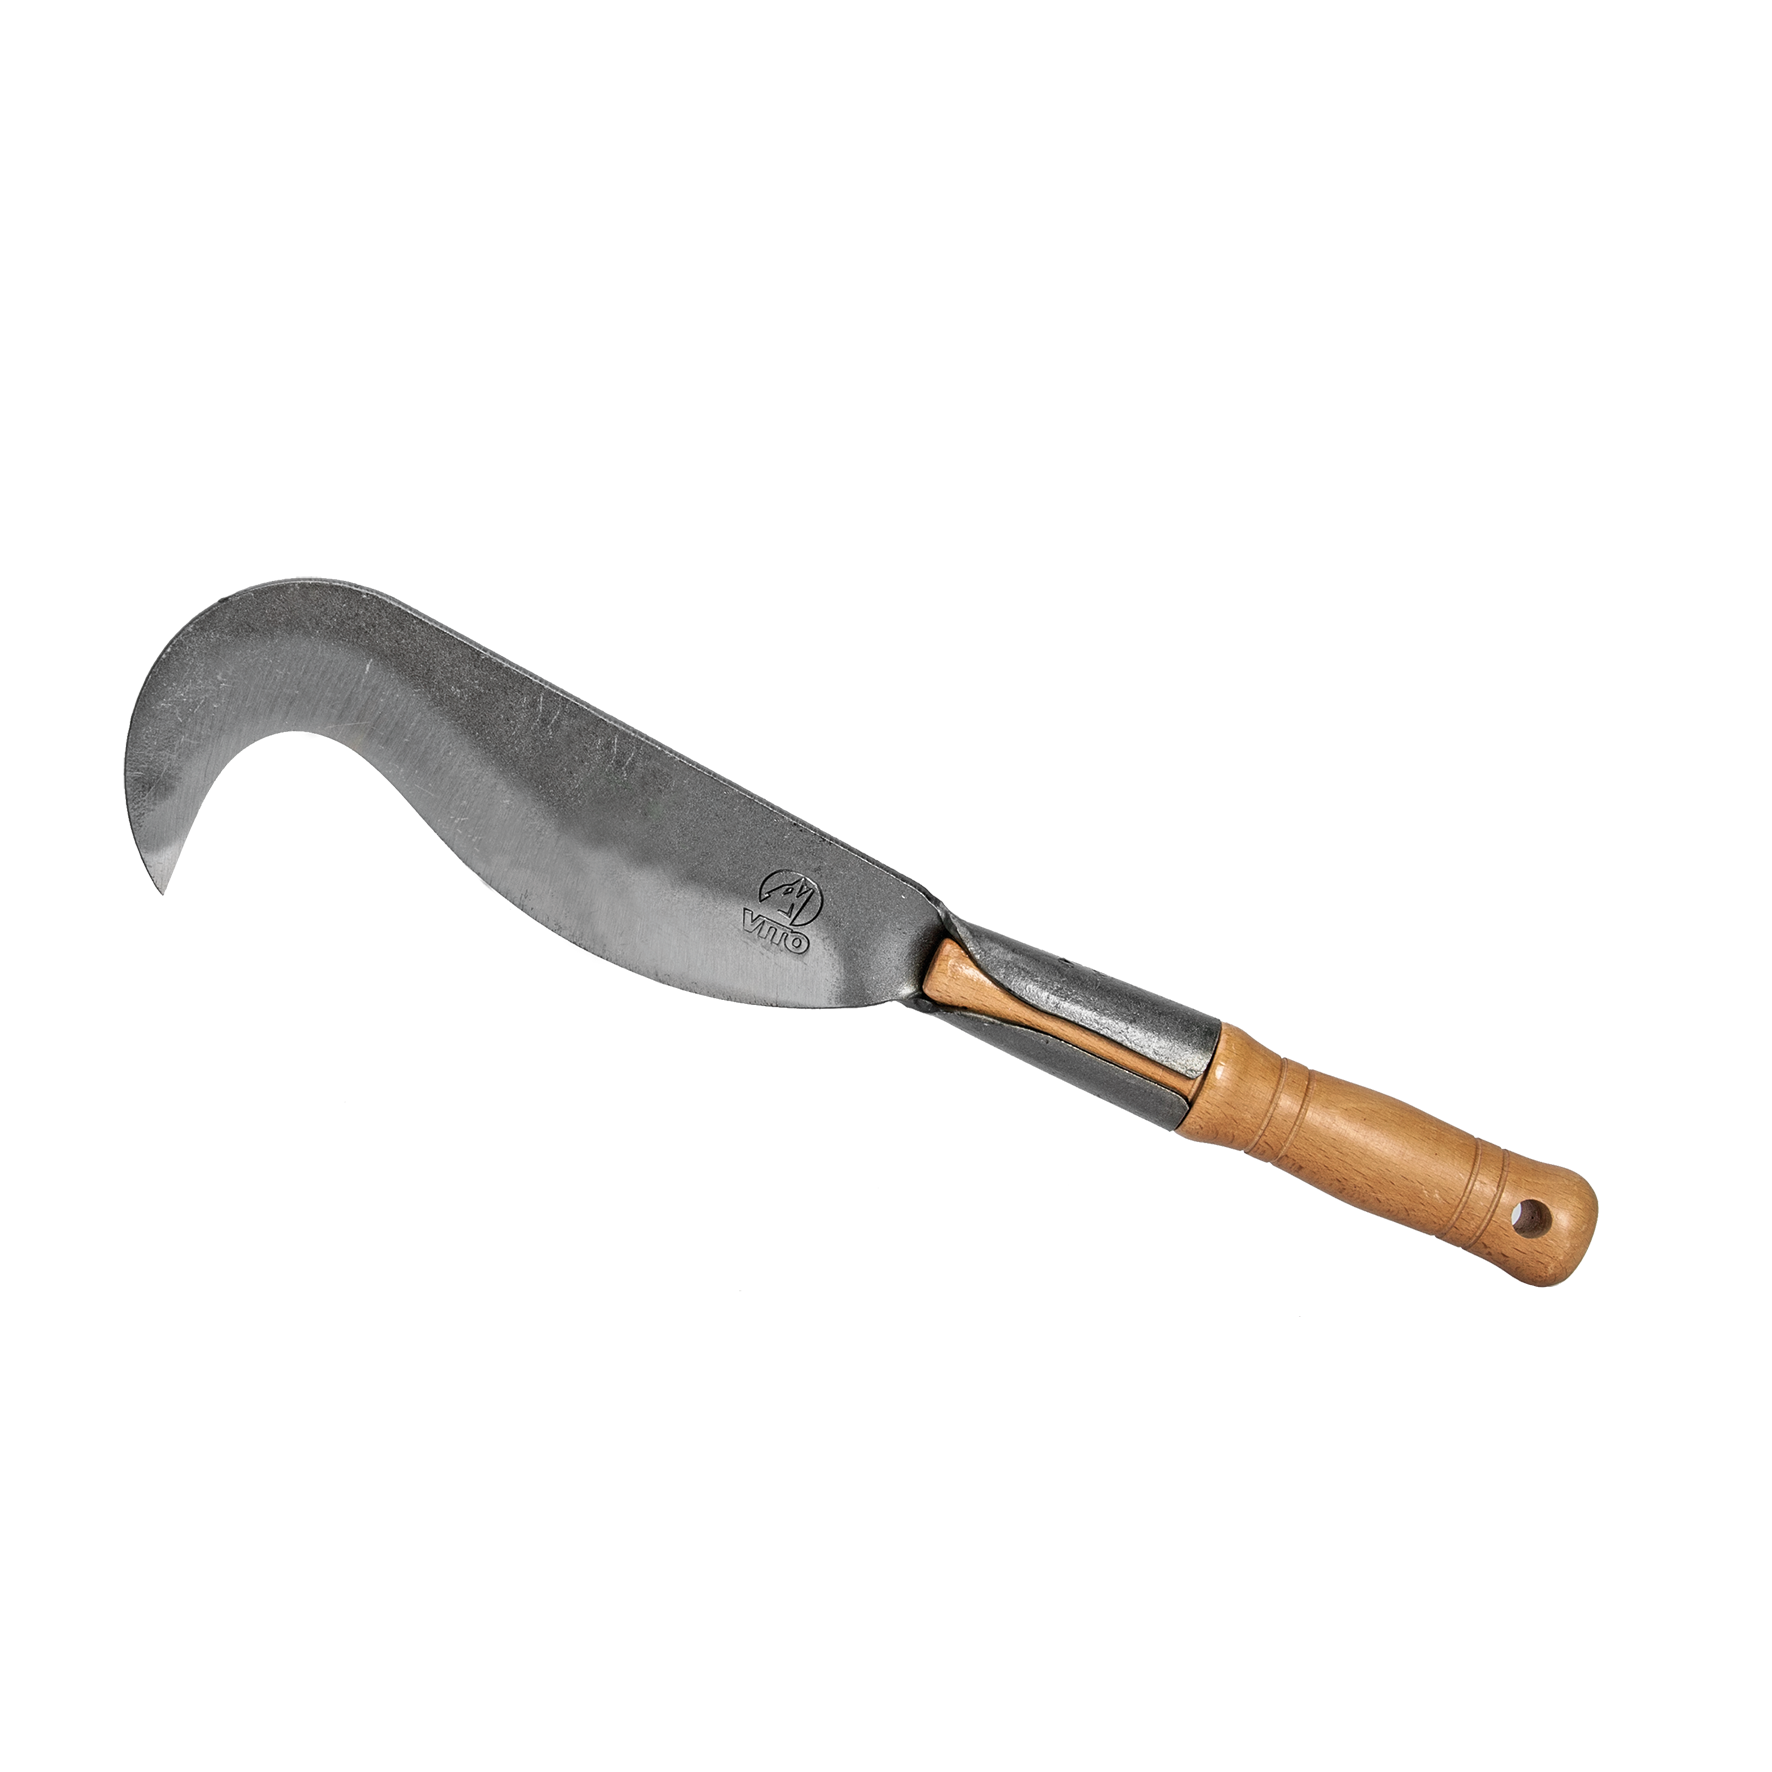 VI1290, Traditional Billhook With Handle